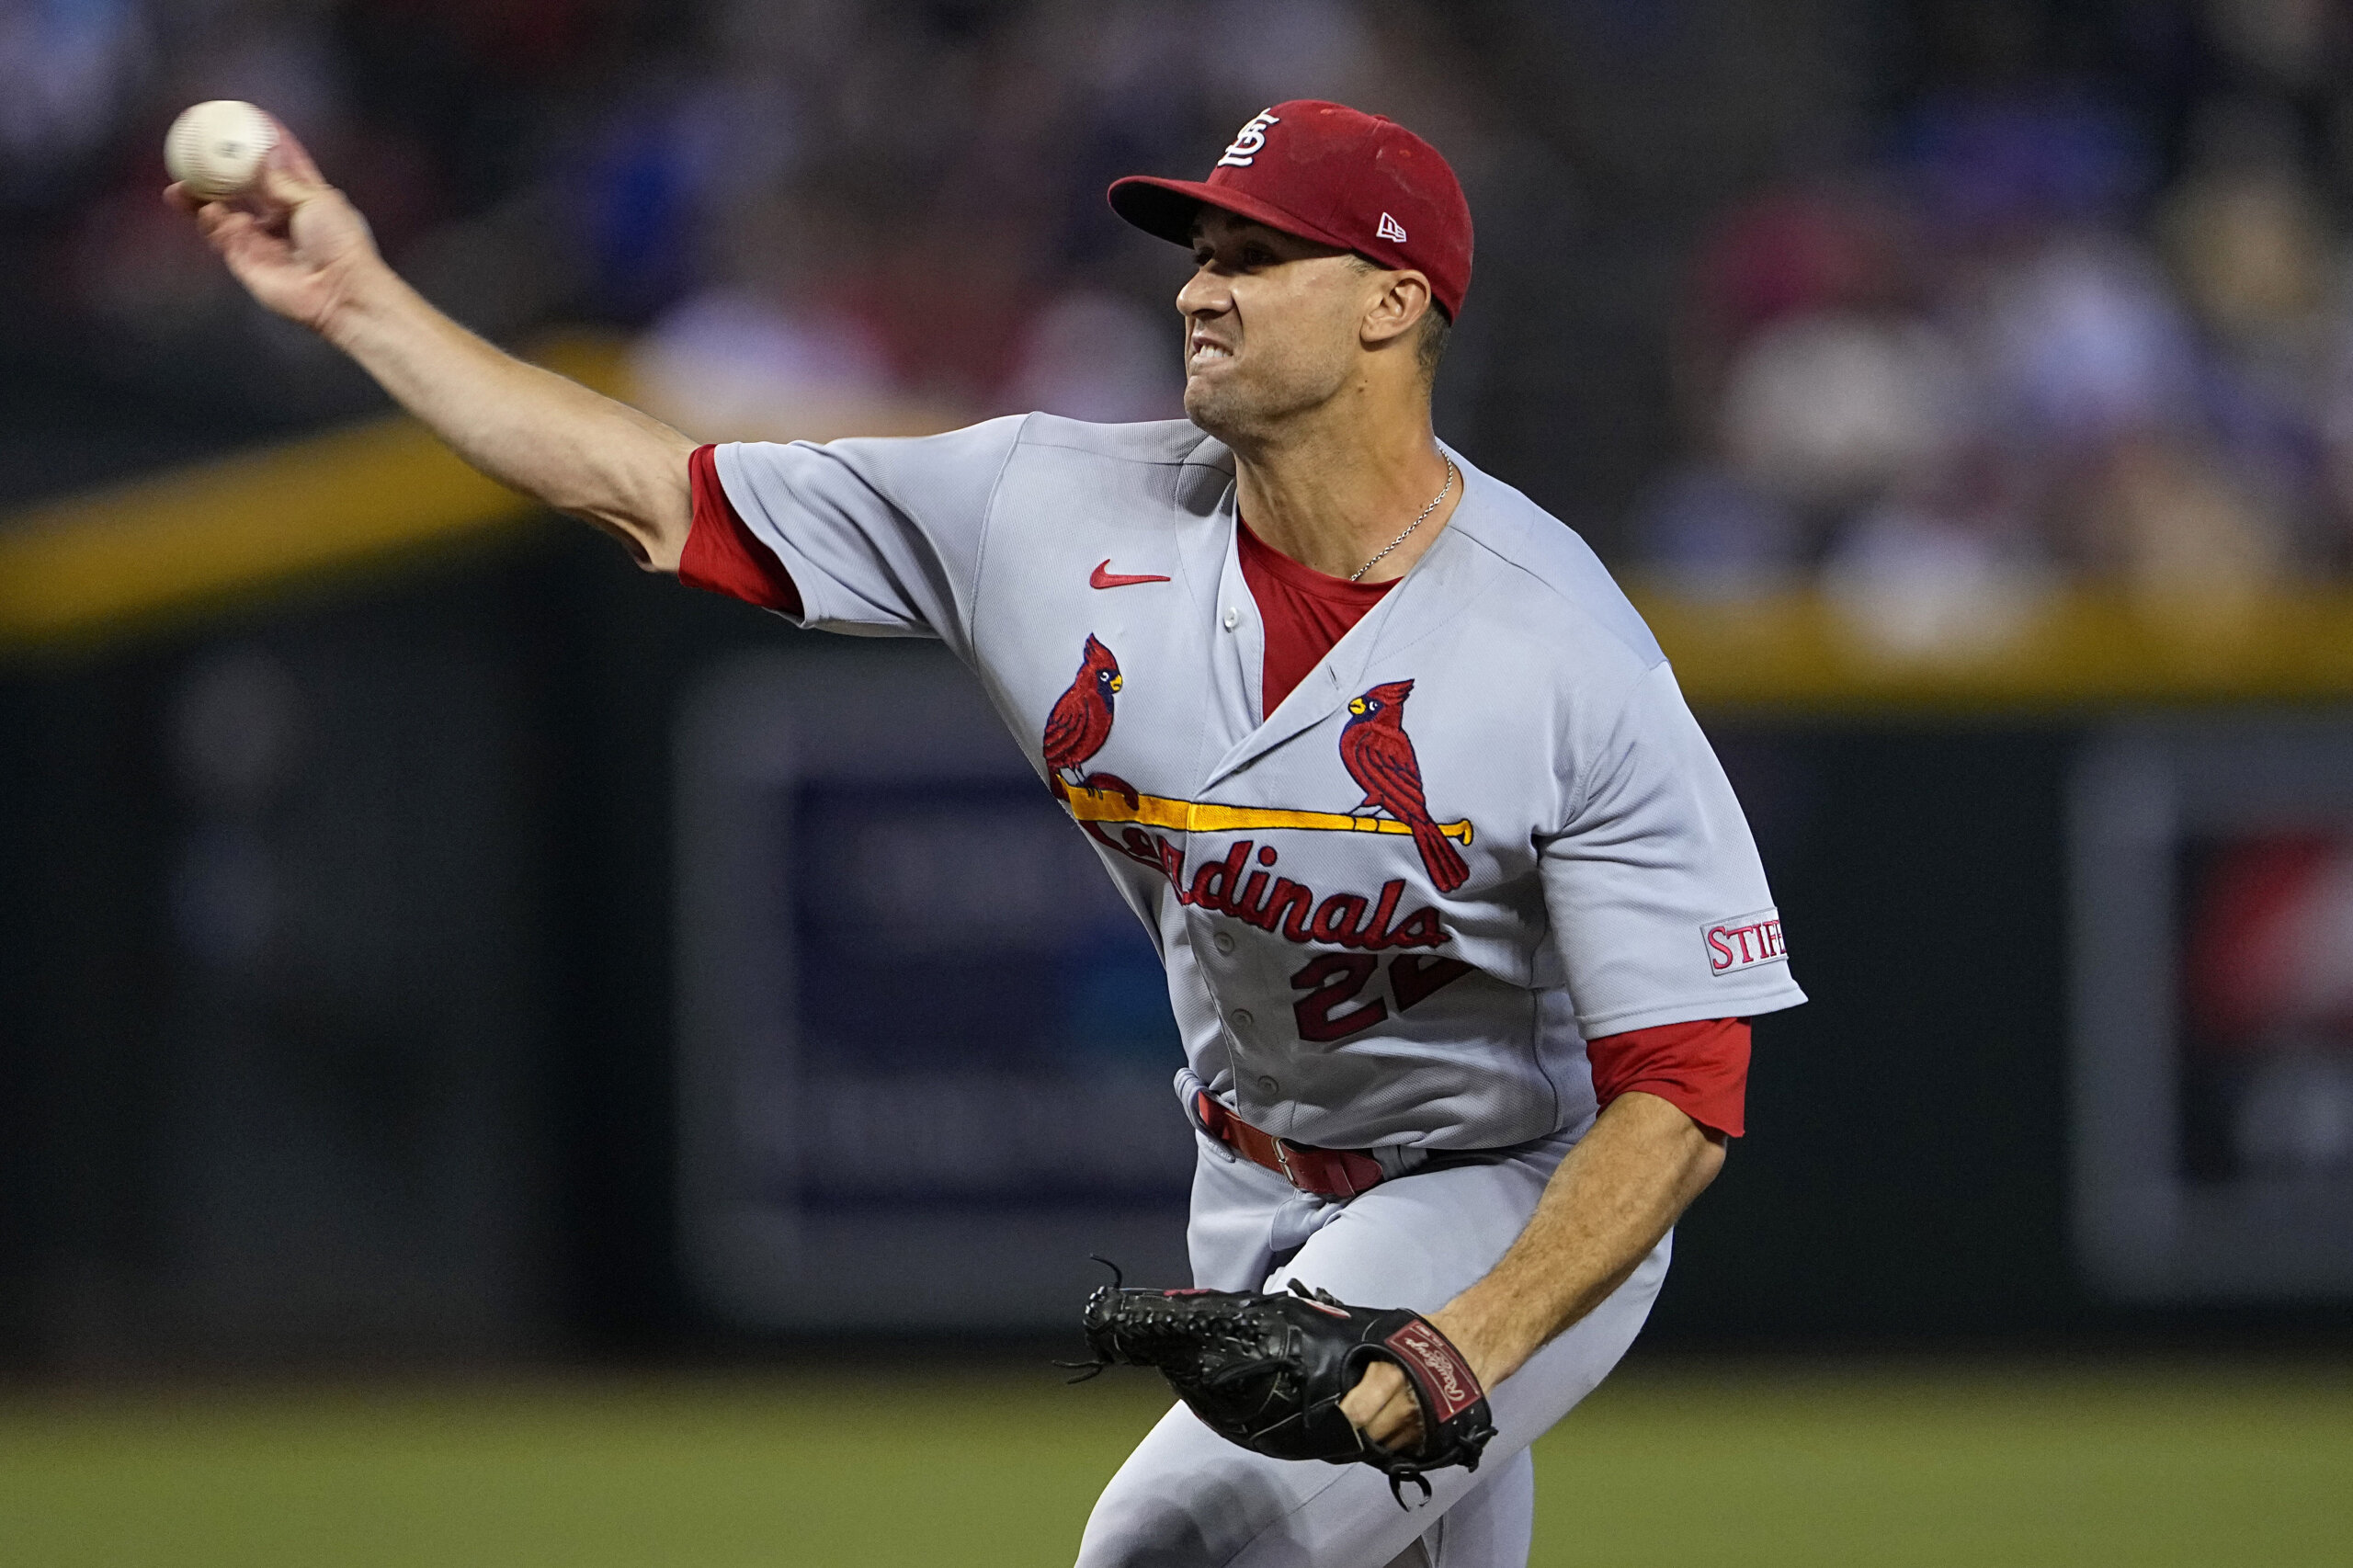 Jack Flaherty of the St. Louis Cardinals looks on prior to a game